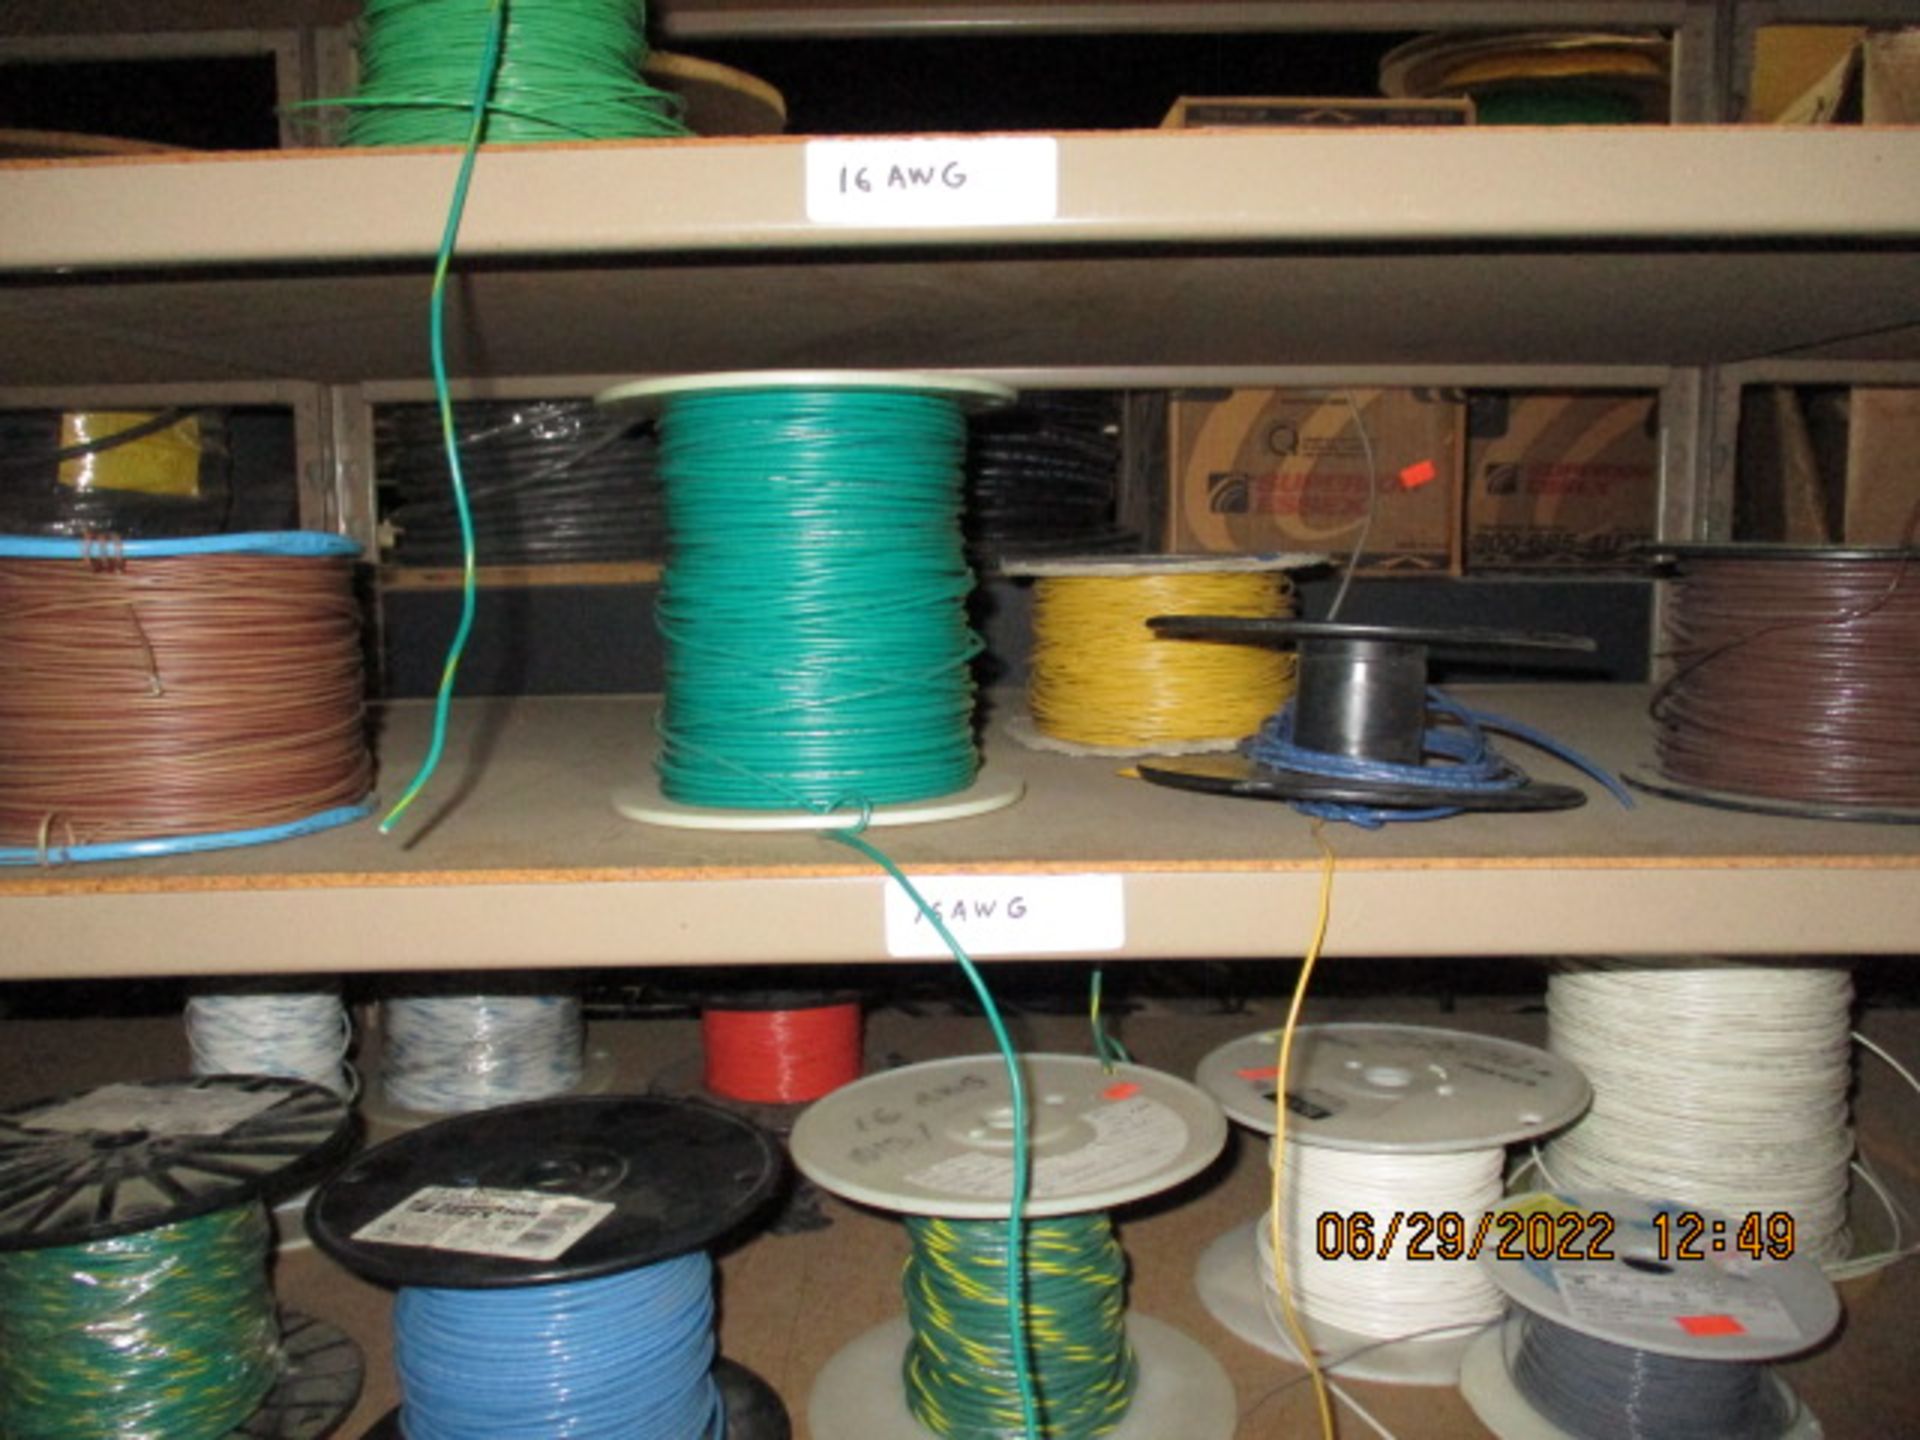 CONTENTS OF SHELVING UNIT CONSISTING OF ASSORTMENT OF CABLE/WIRE - Image 5 of 9